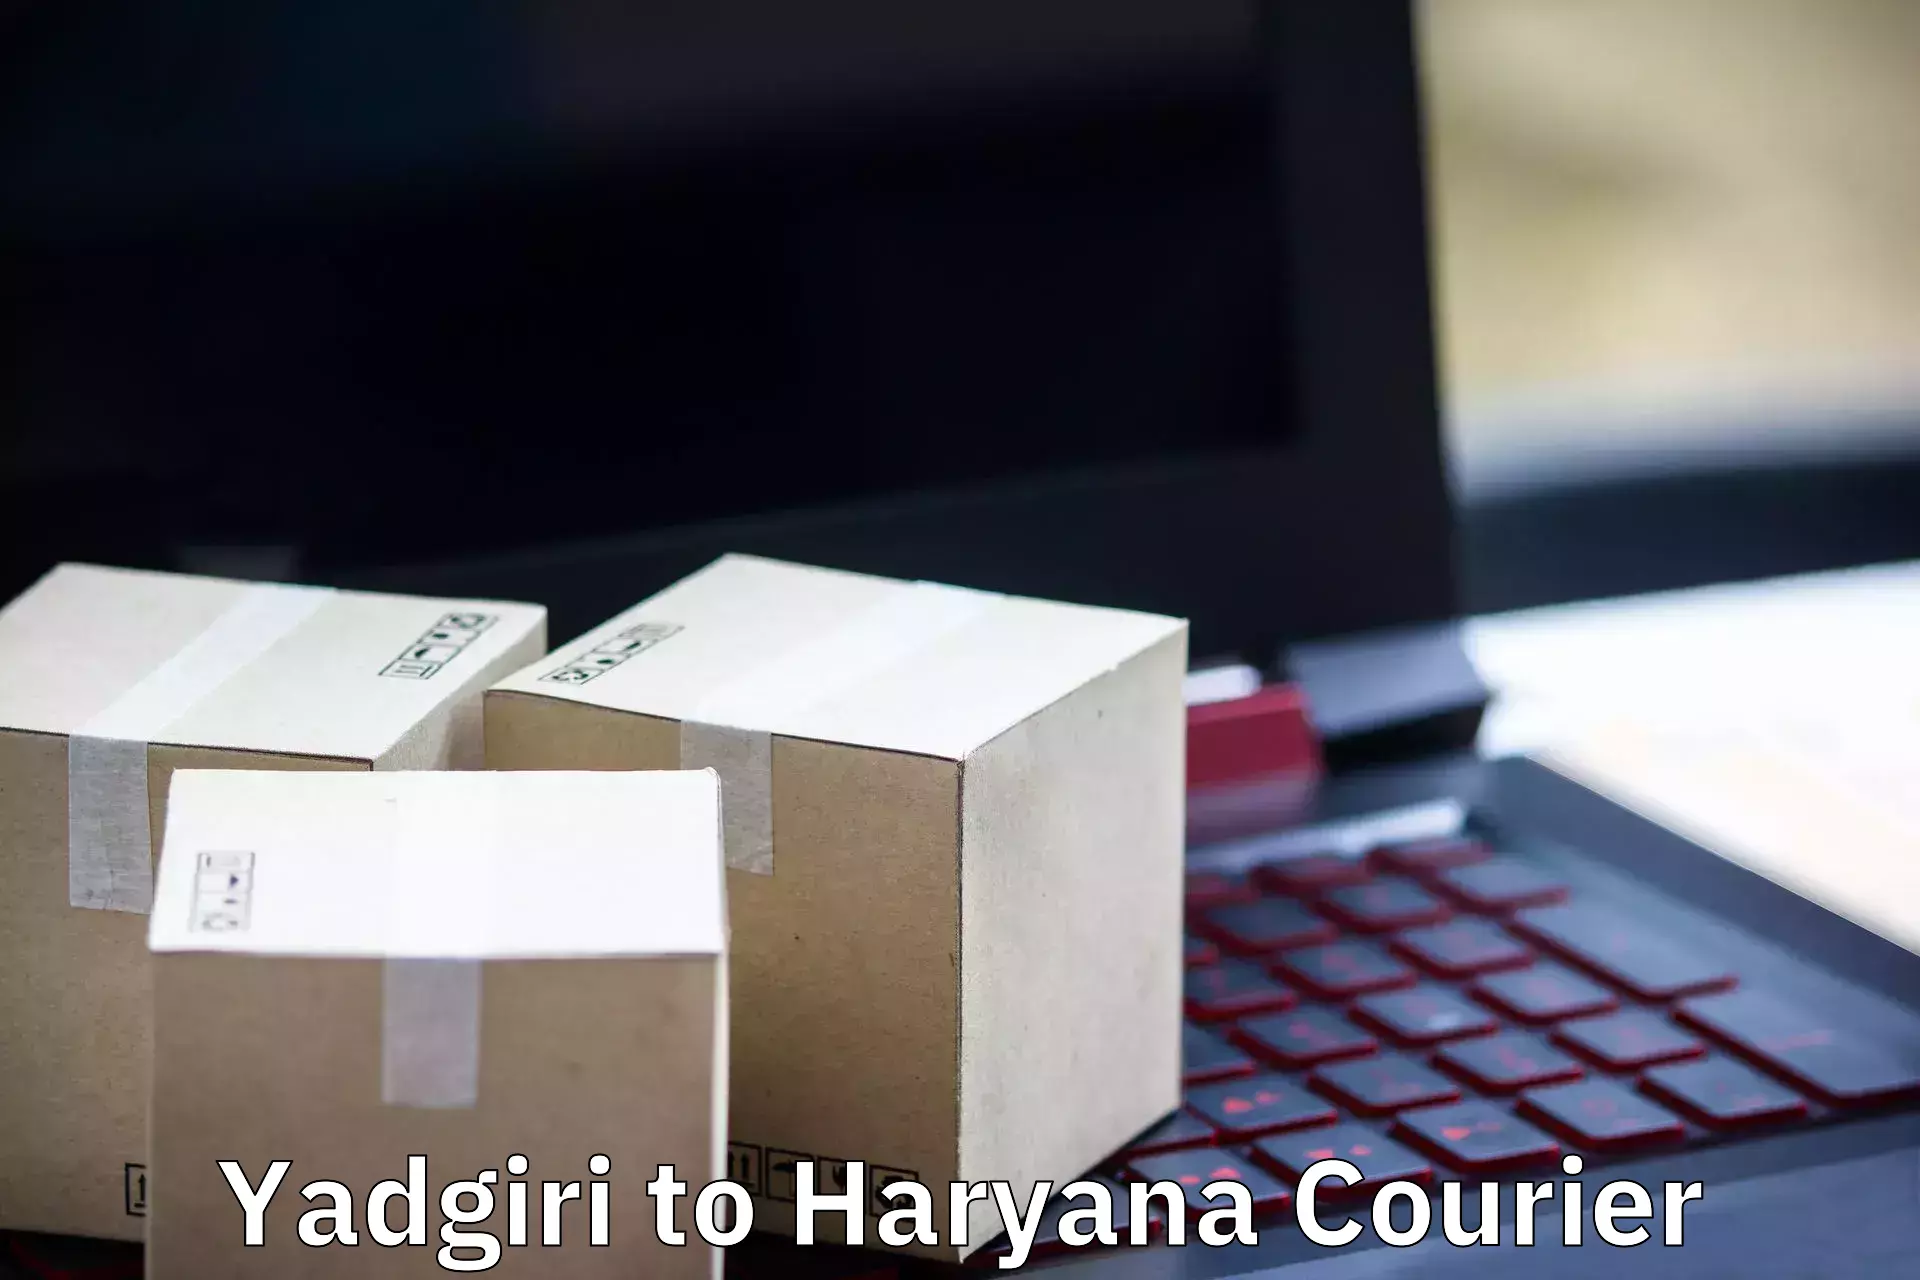 Trusted relocation experts Yadgiri to Gurgaon